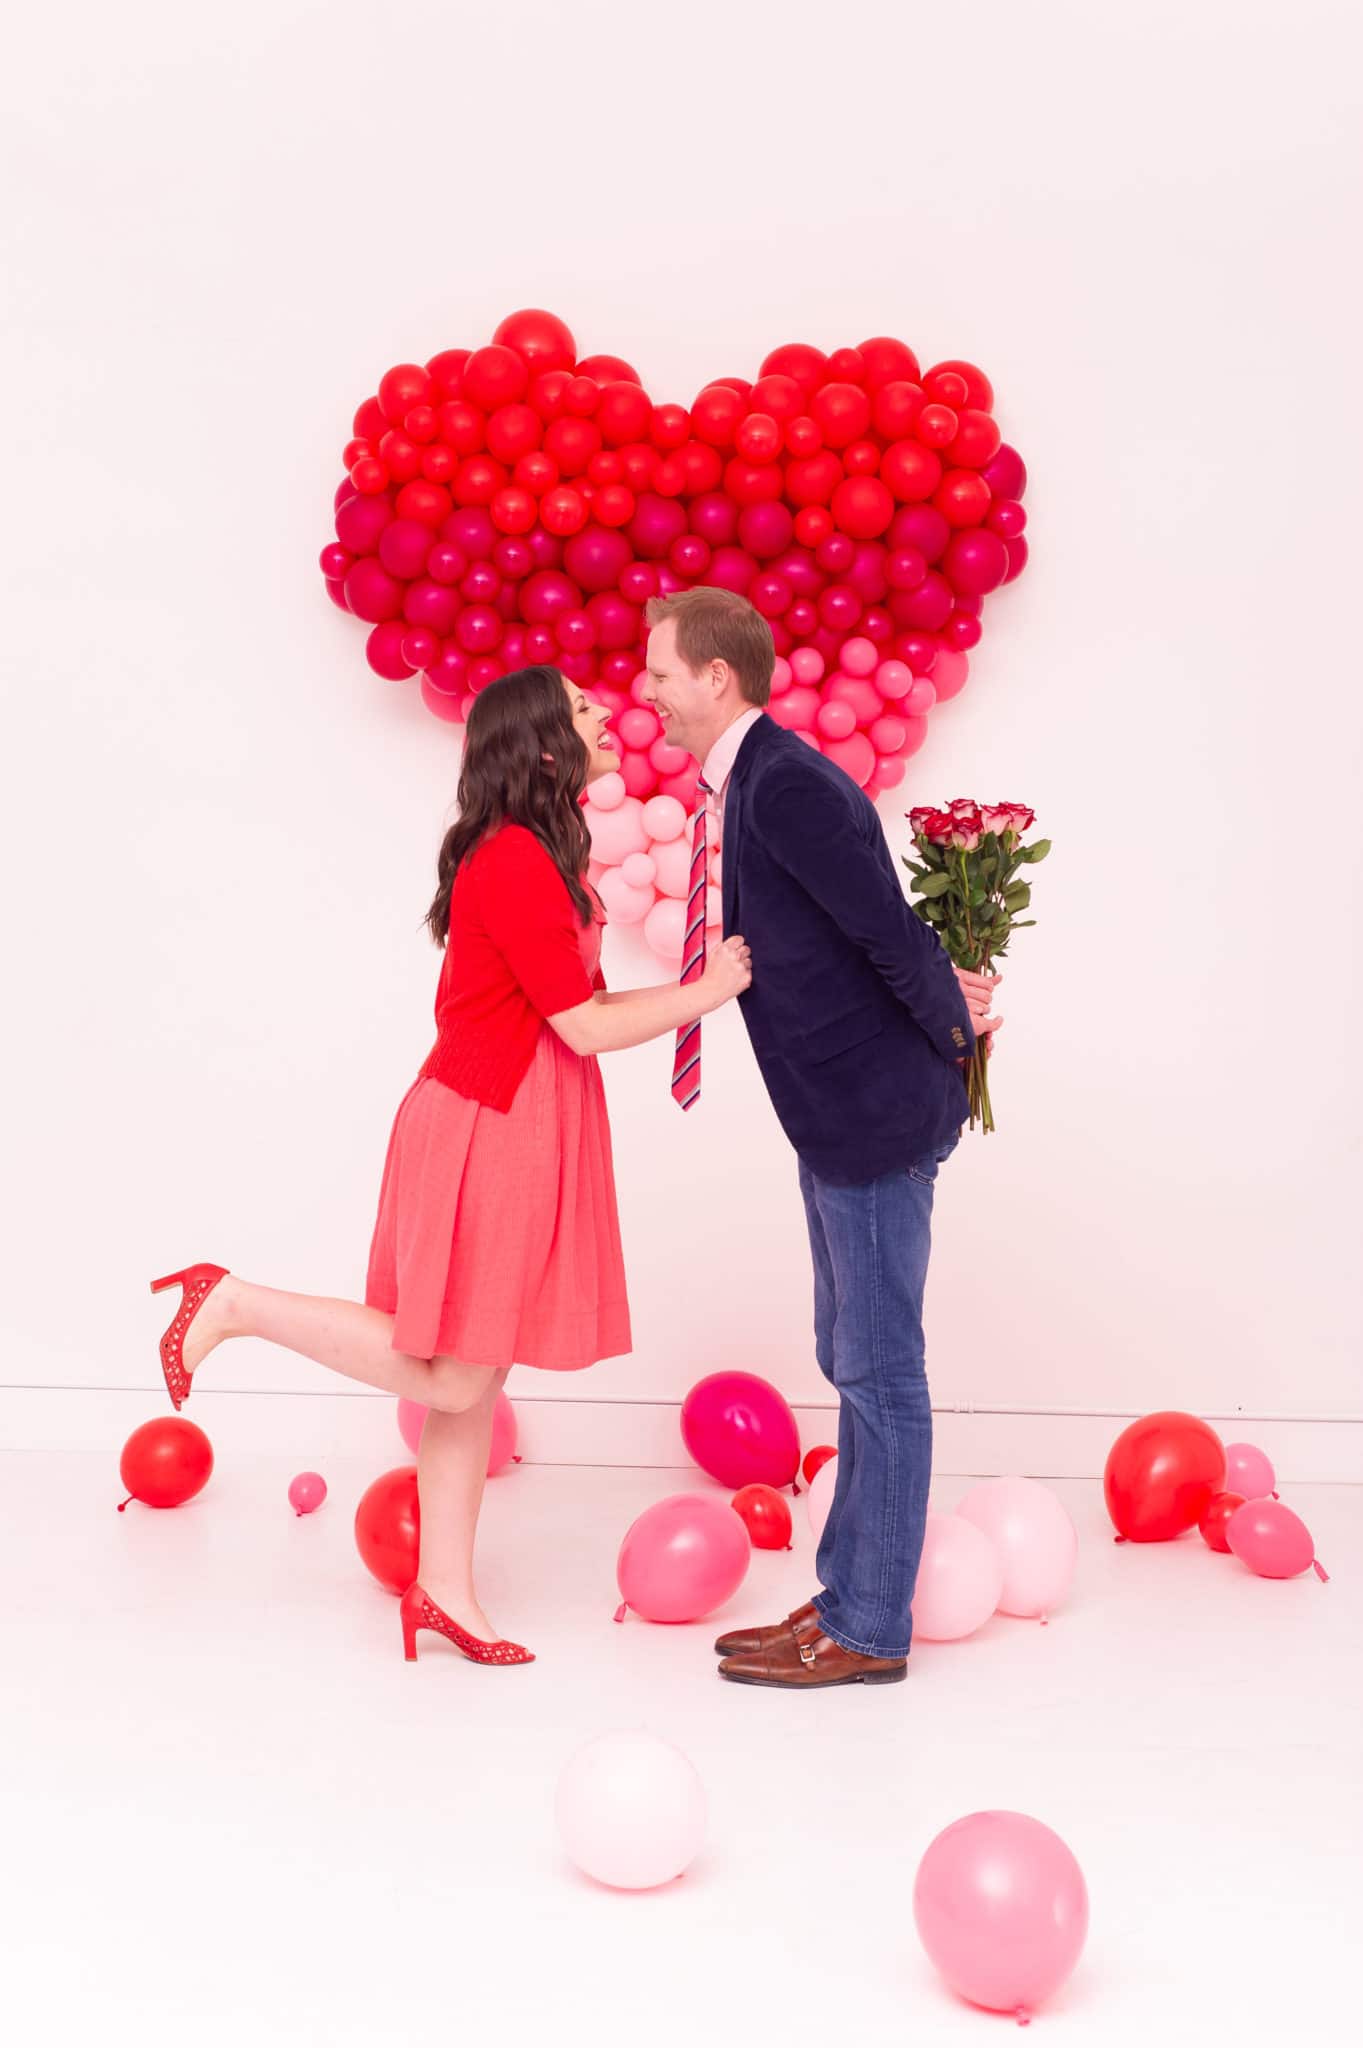 New Disney Valentine's Day Wallpapers and Printable Cards, Plus  Villaintine's Day Surprises